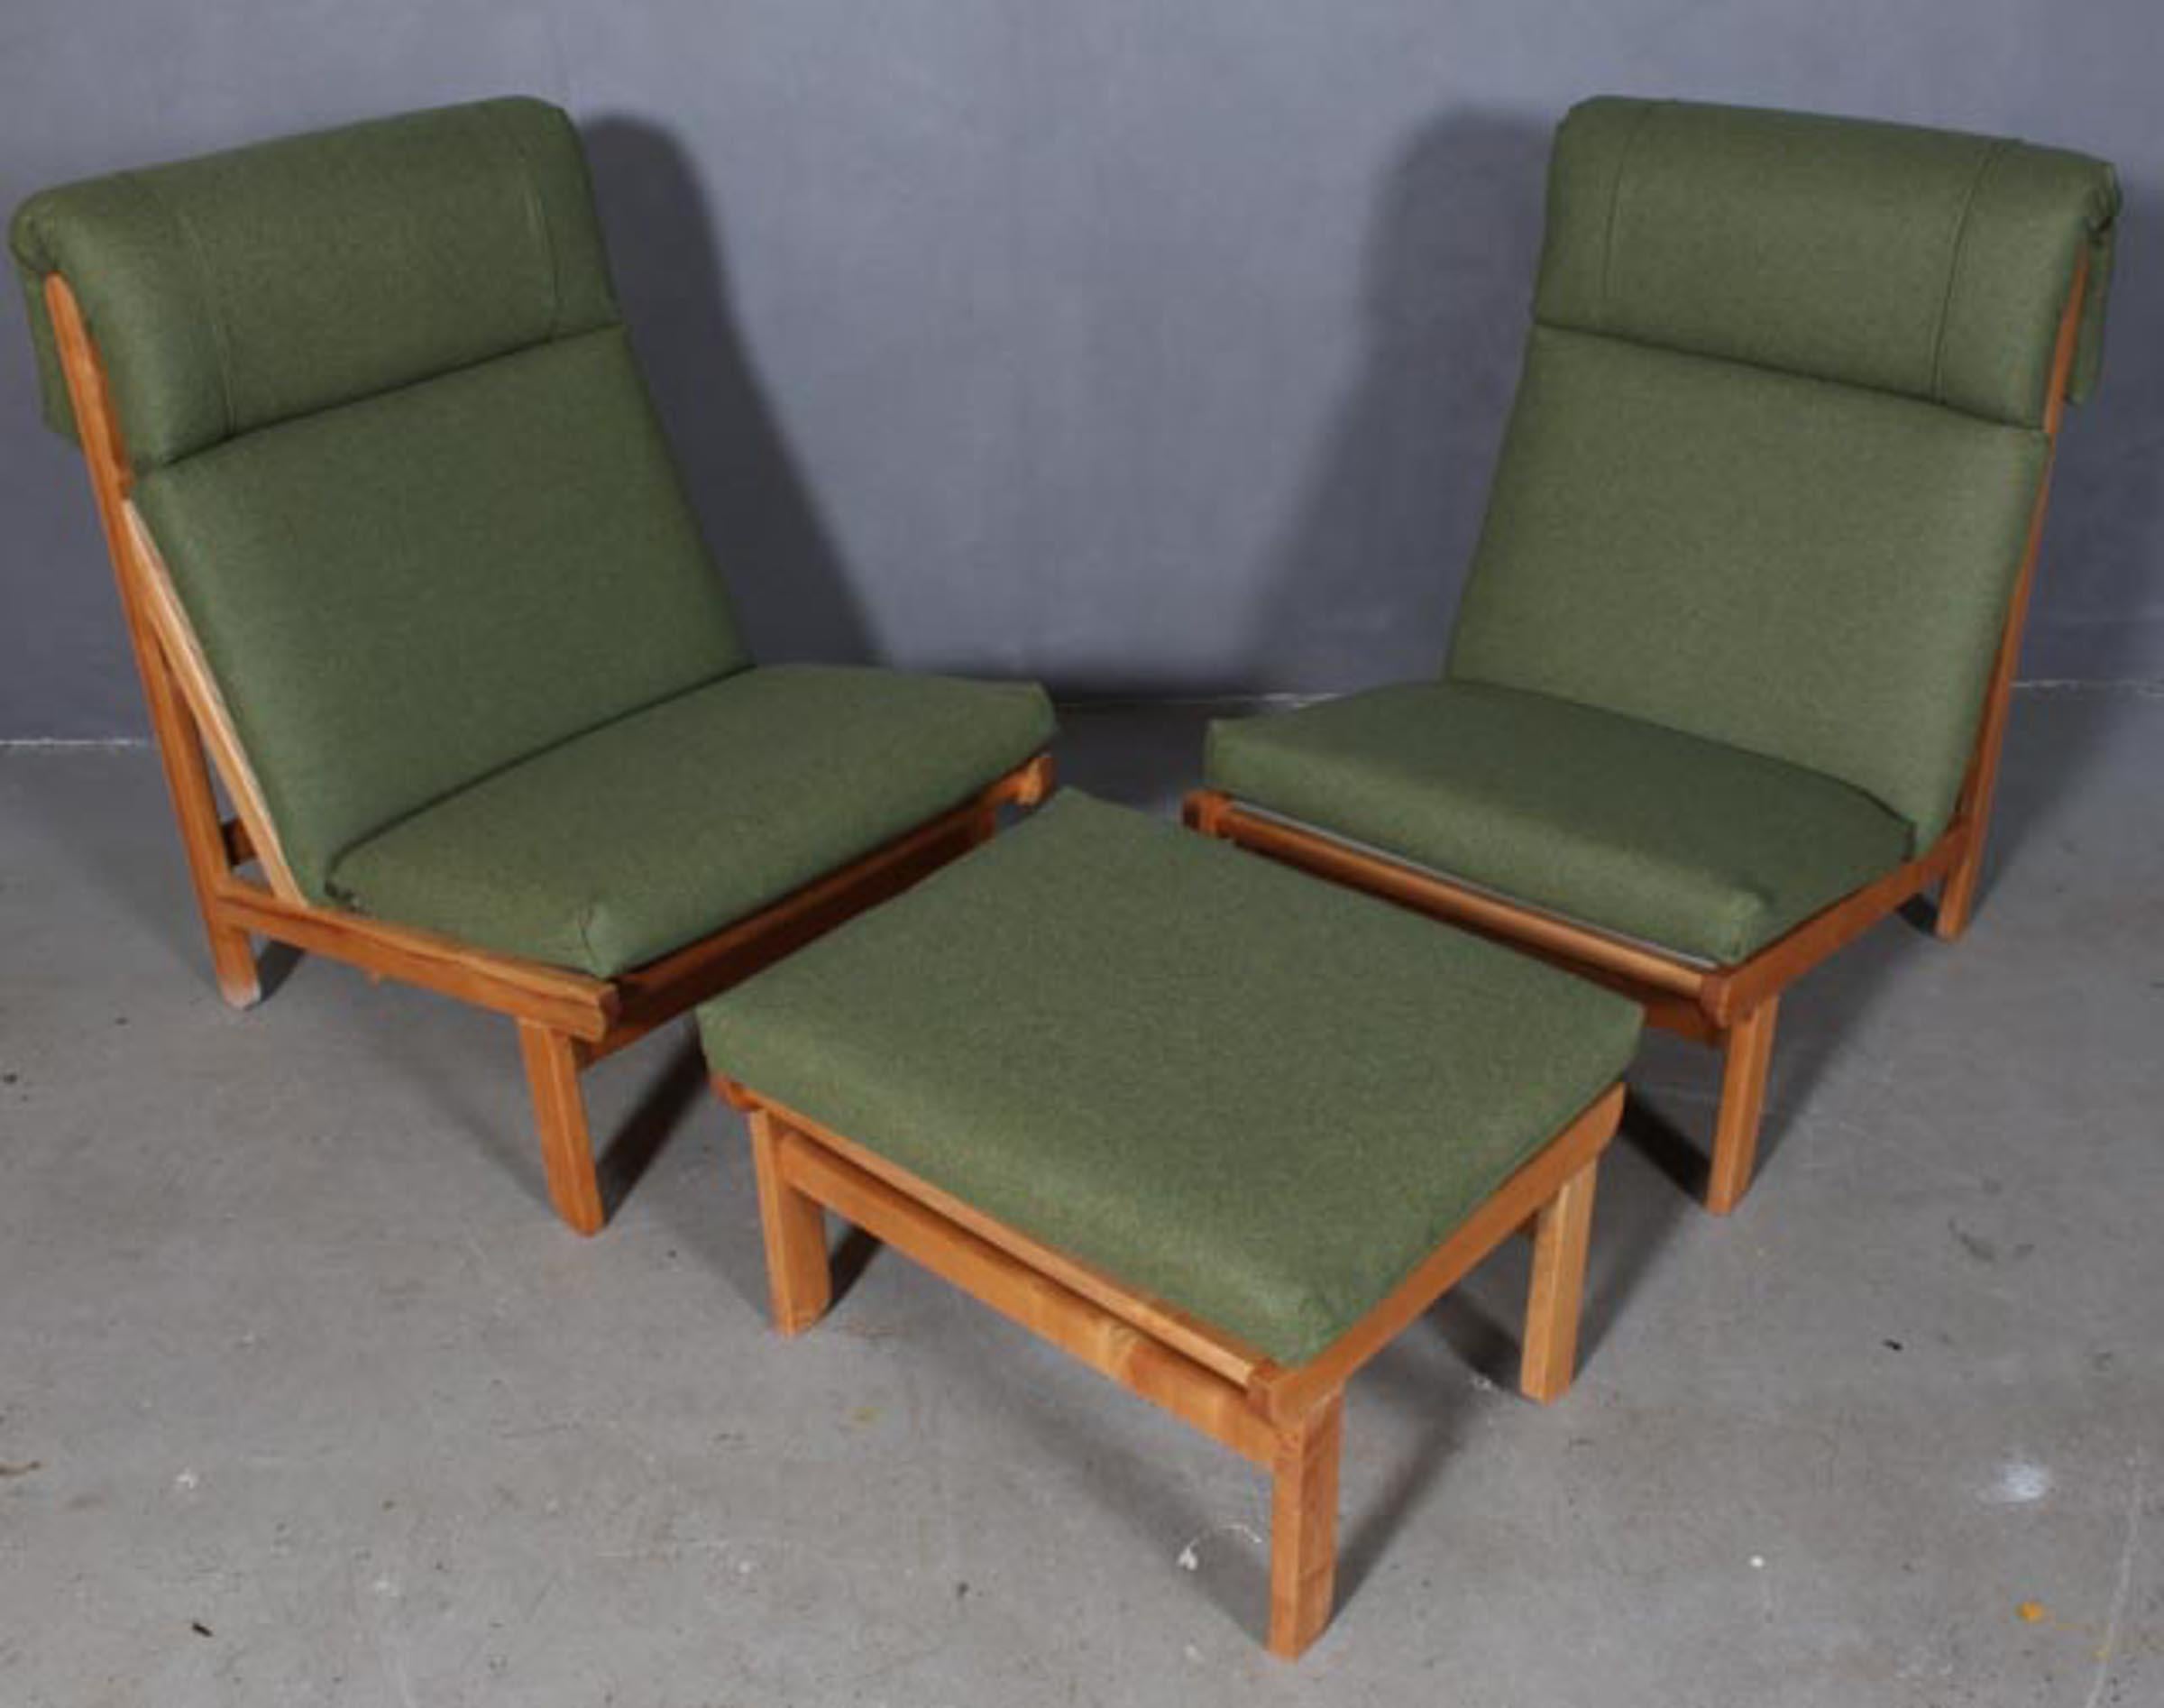 Rare and very sought after pair of easy lounge chair designed by Bernt Petersen for Schiang Furniture of Denmark in 1966. Pine frames with loose cushions in seat and back upholstered with wool. The chairs are very comfortable with a low sloping